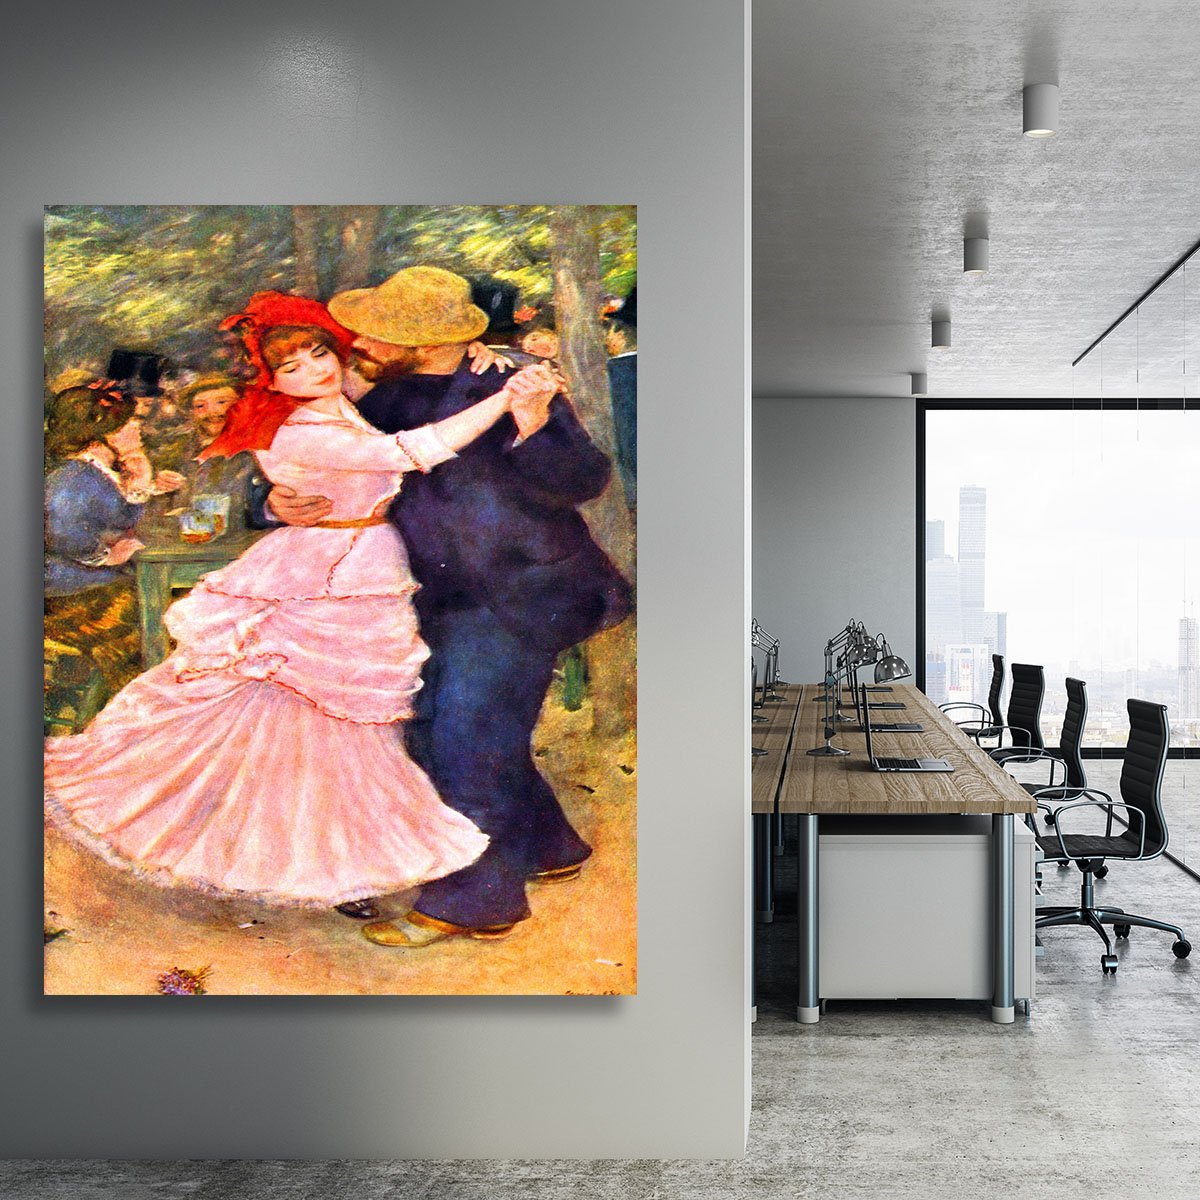 Dance in Bougival by Renoir Canvas Print or Poster